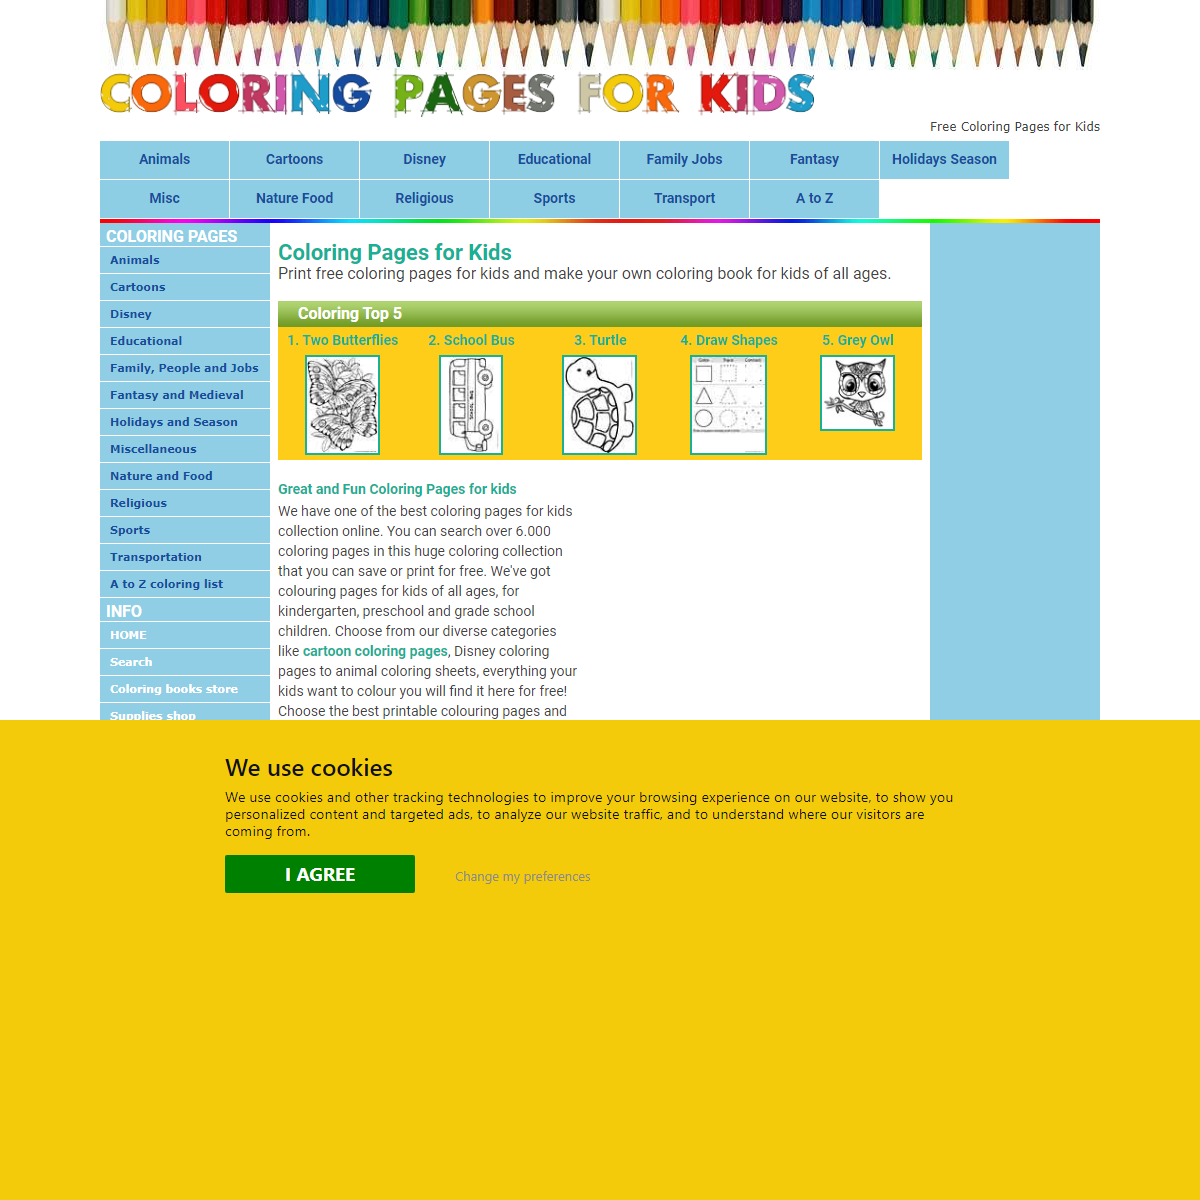 A complete backup of https://www.coloring-pages-kids.com/